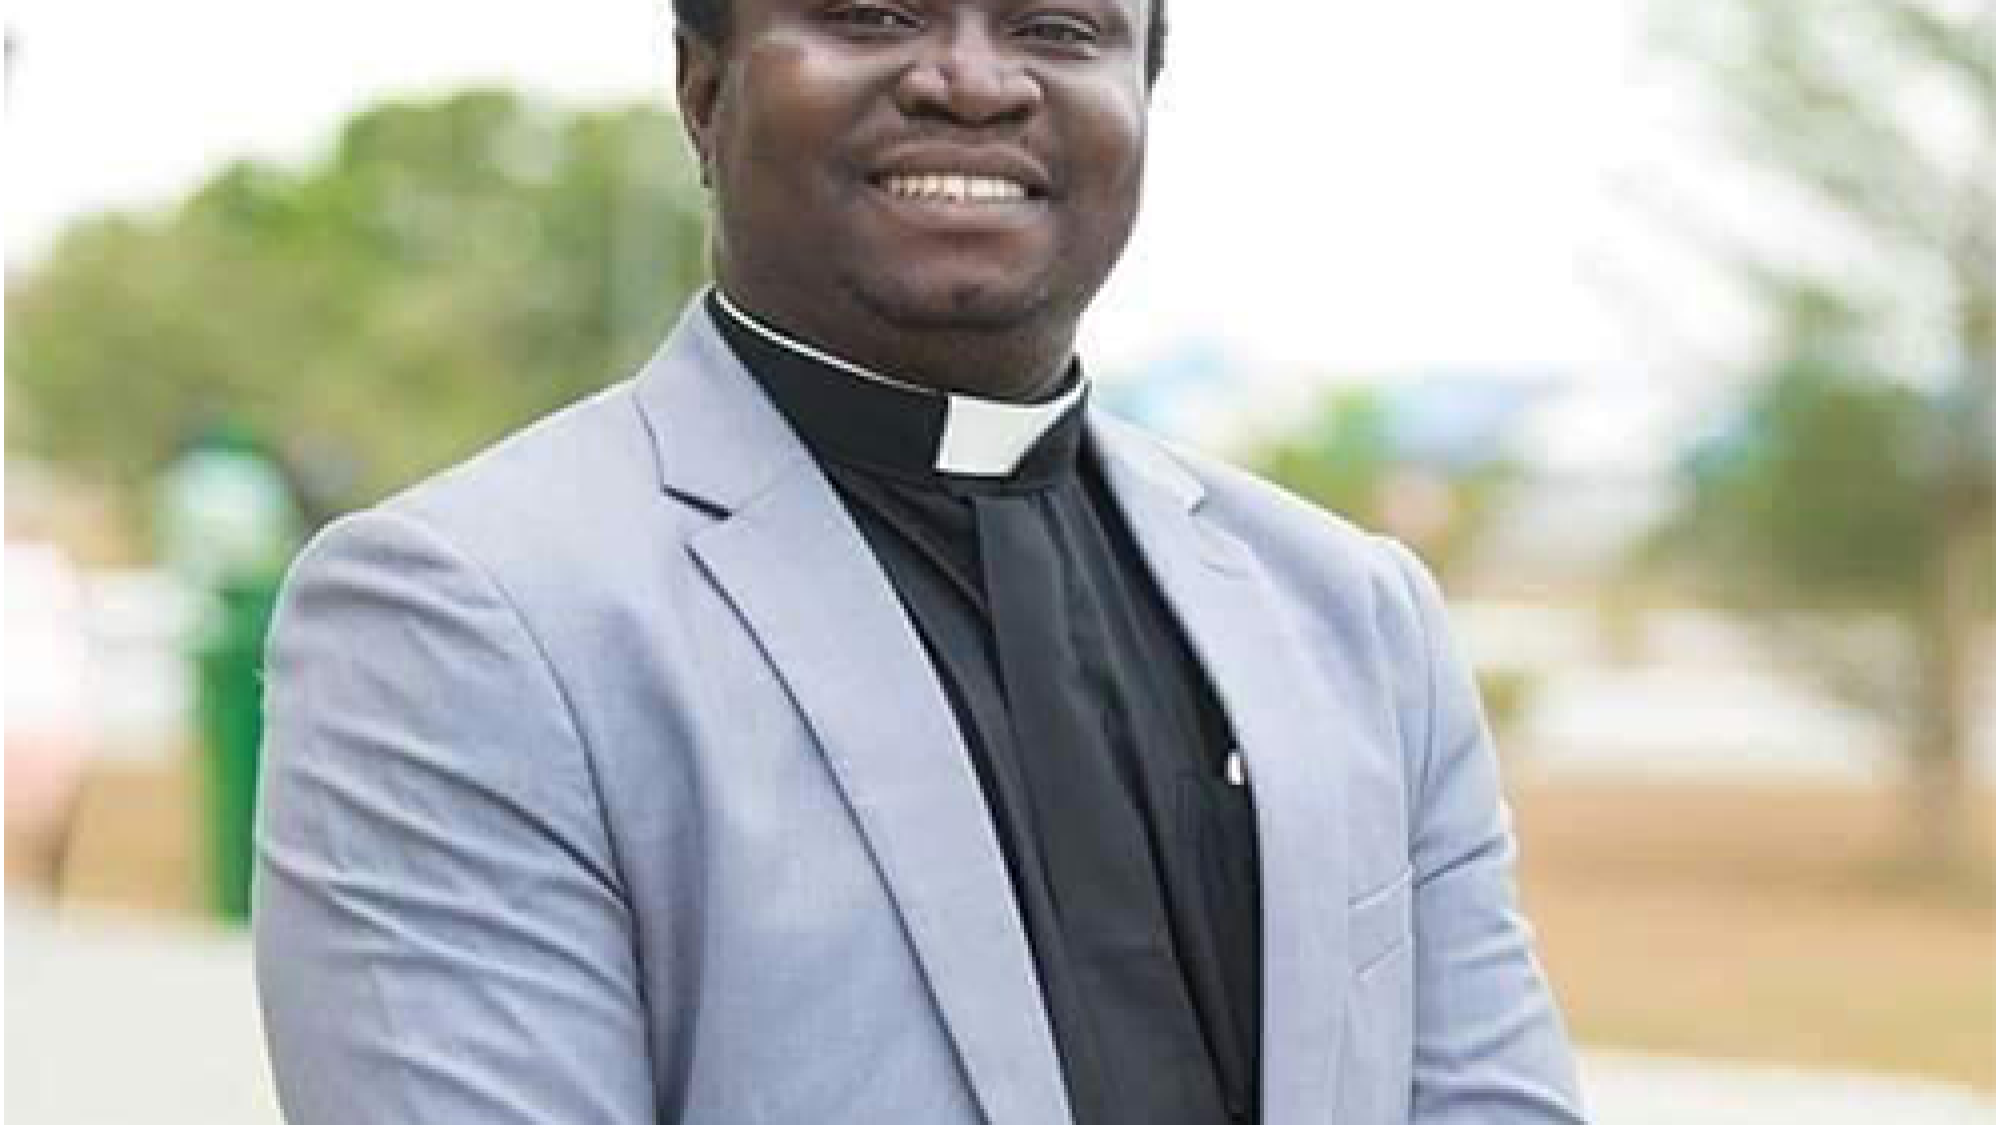 WHY NATURAL DISASTERS ... WHERE IS GOD IN ALL OF THAT - Apostle Seth Kwame Fianko-Larbi (Kenya National Head of The Church of Pentecost)